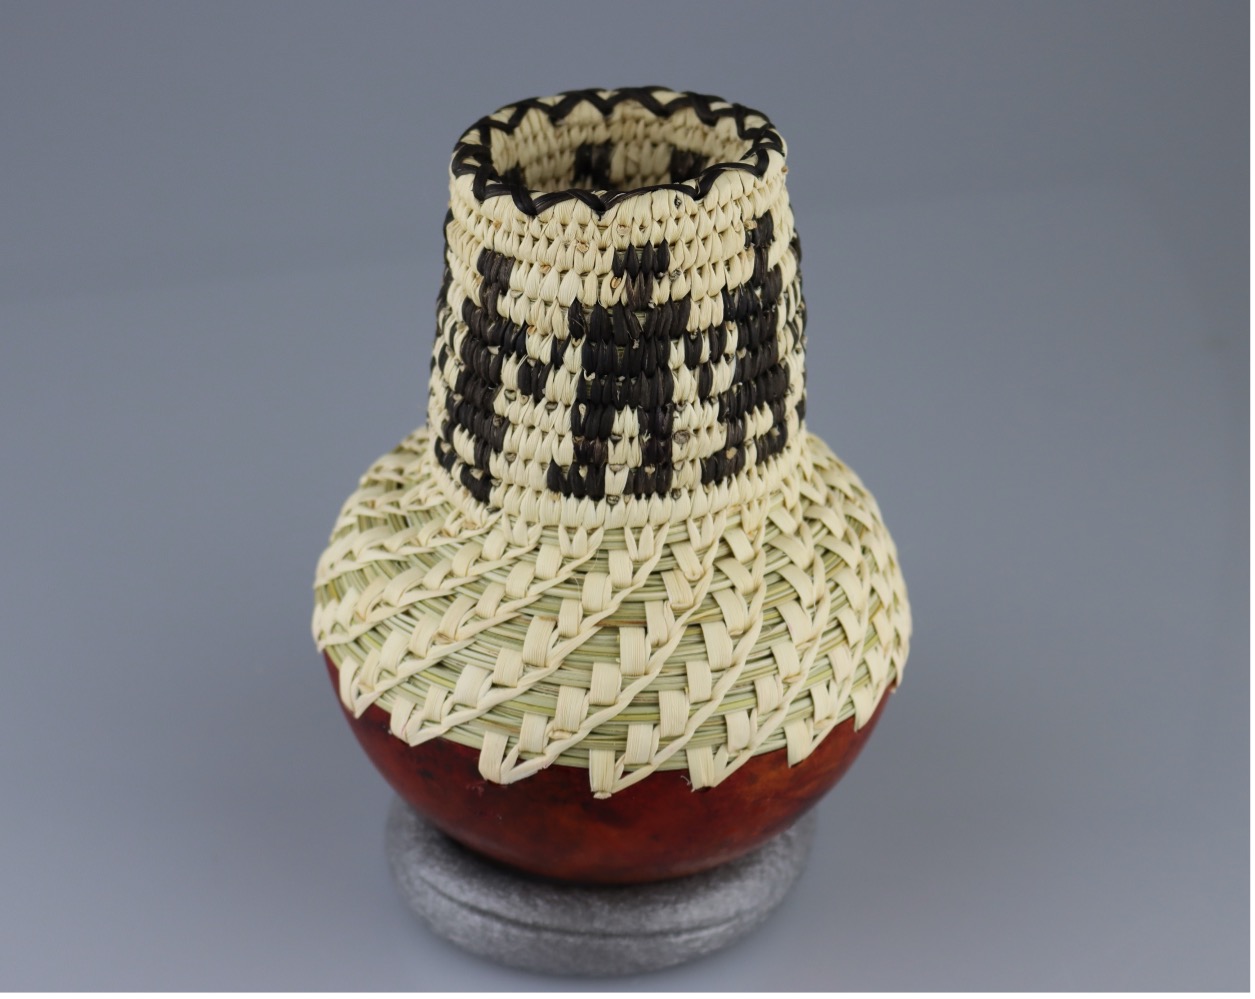 woven vessel with brown gourd shell bottom and woven top with black figures